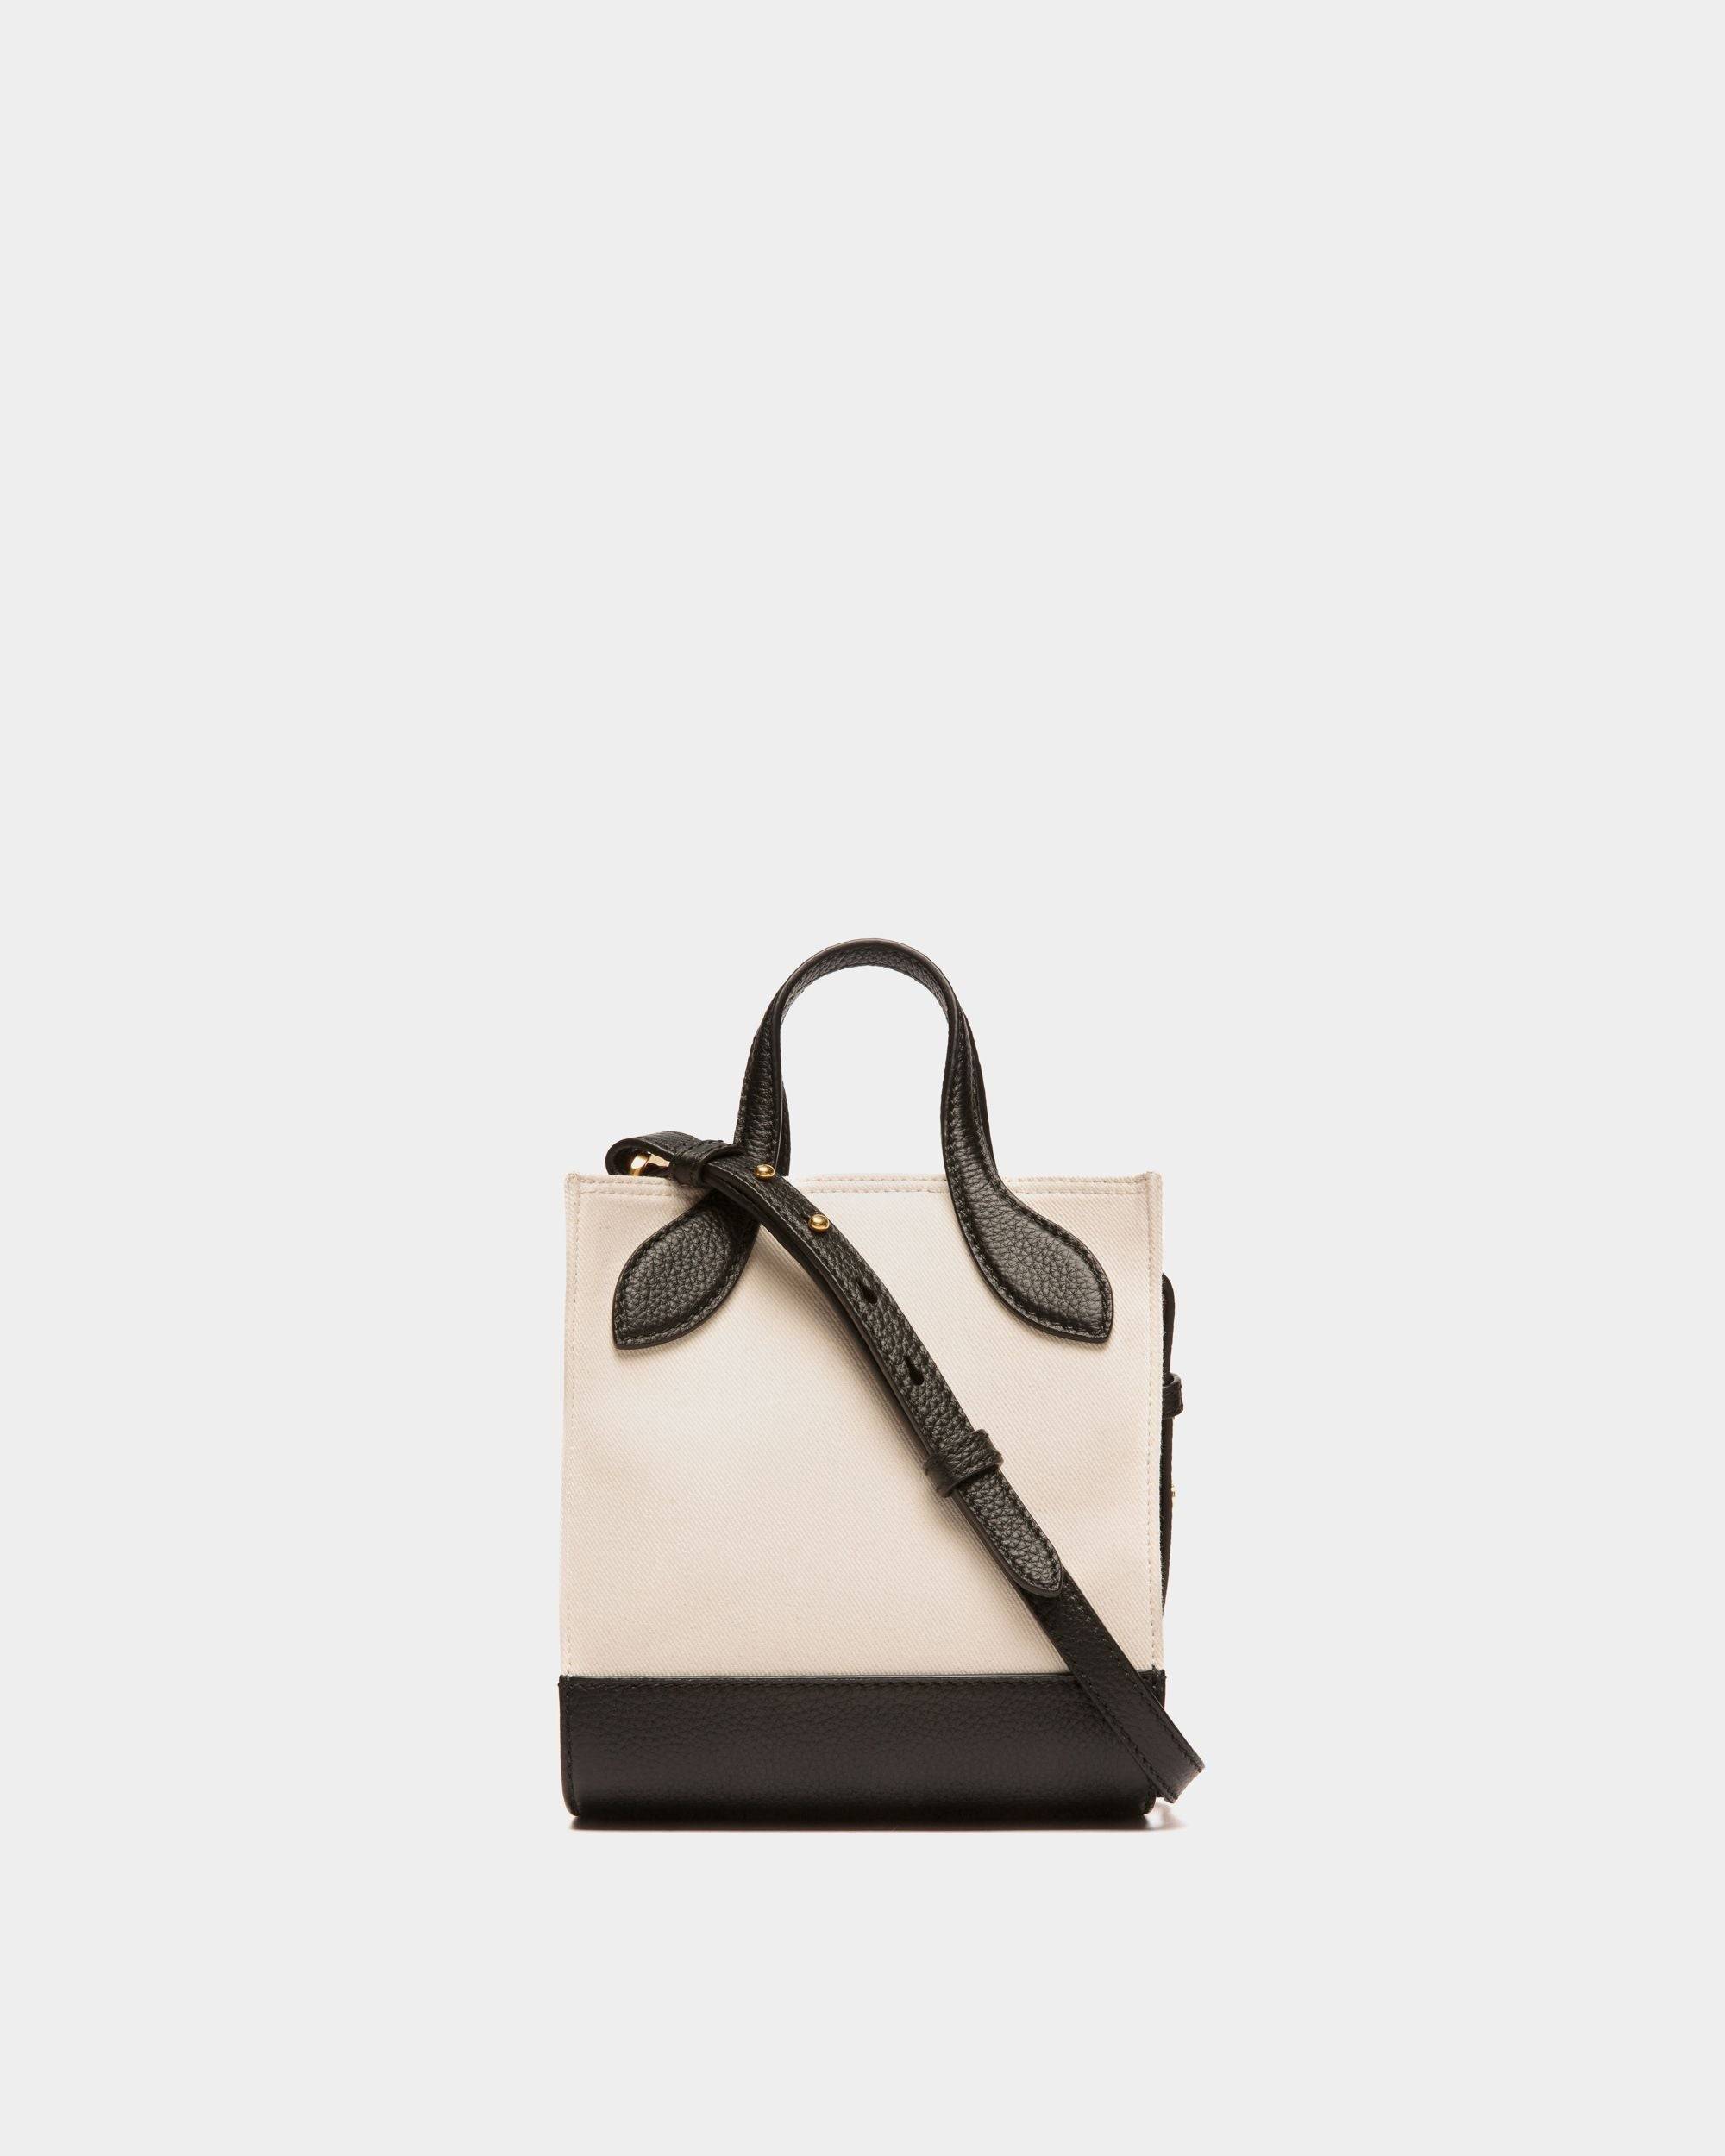 Bar | Women's Mini Tote Bag in Neutral And Black Canvas And Leather | Bally | Still Life Back